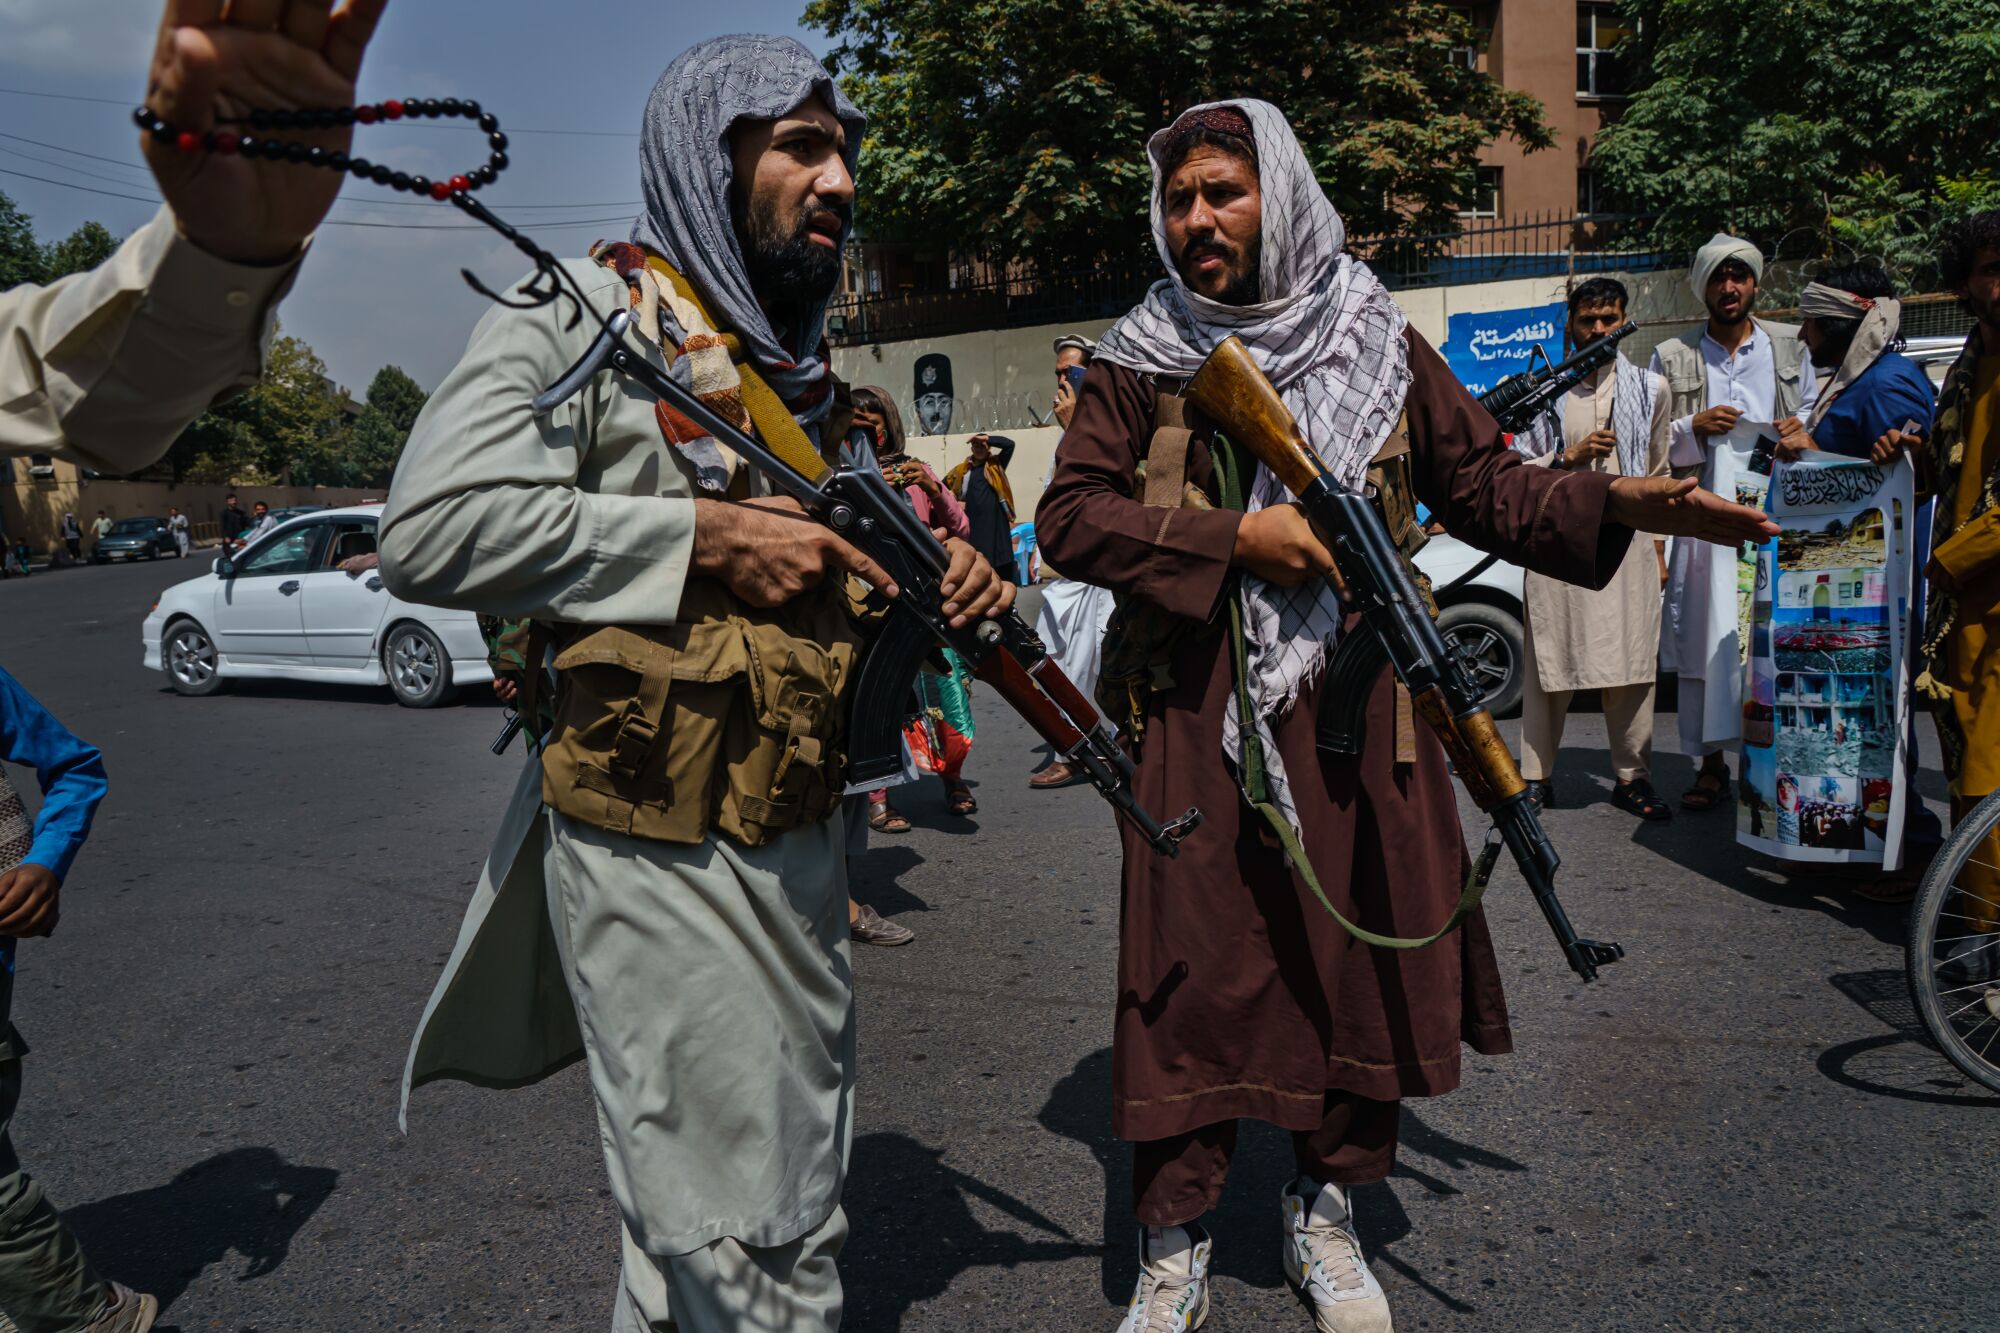 Taliban fighters mobilize to control a crowd.